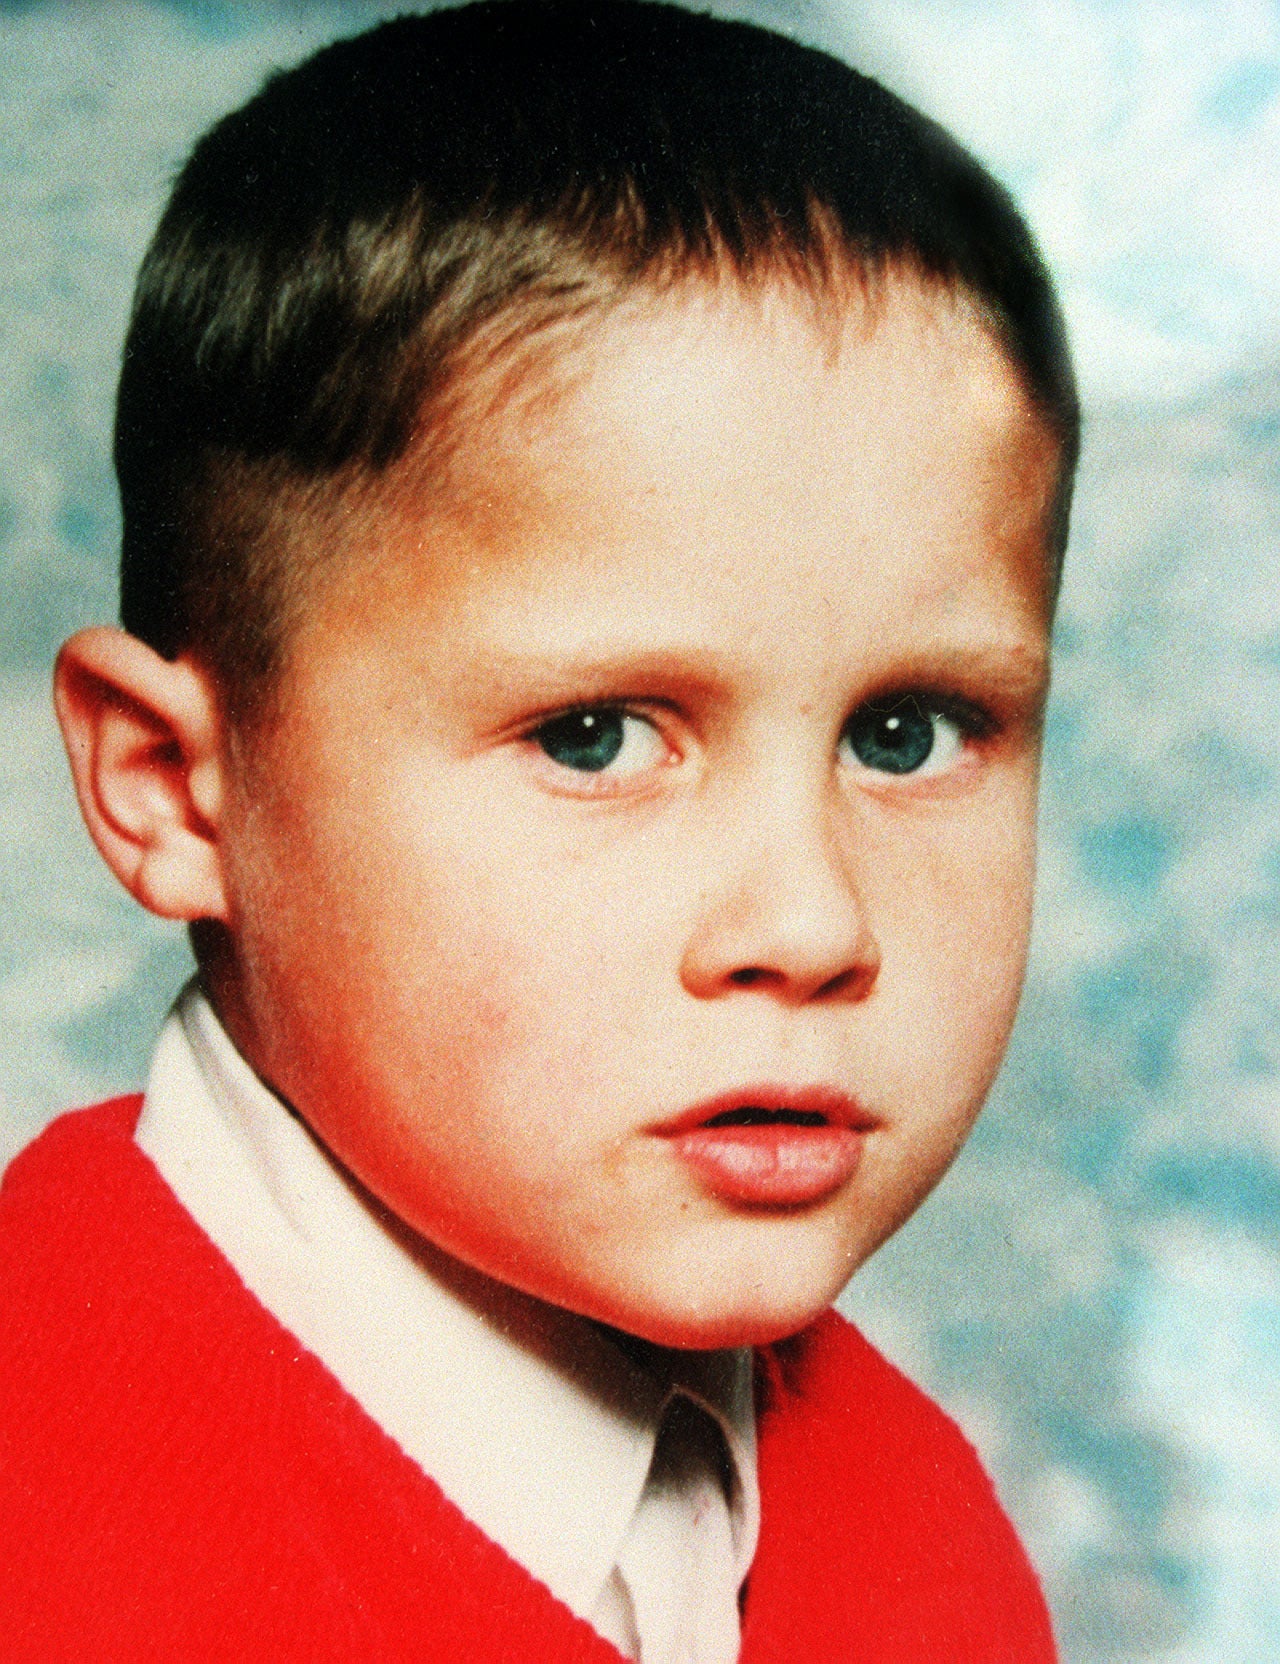 The mother of six-year-old Rikki Neave said she was telling the “truth and nothing but the truth” when denying his murder more than 25 years ago (PA)